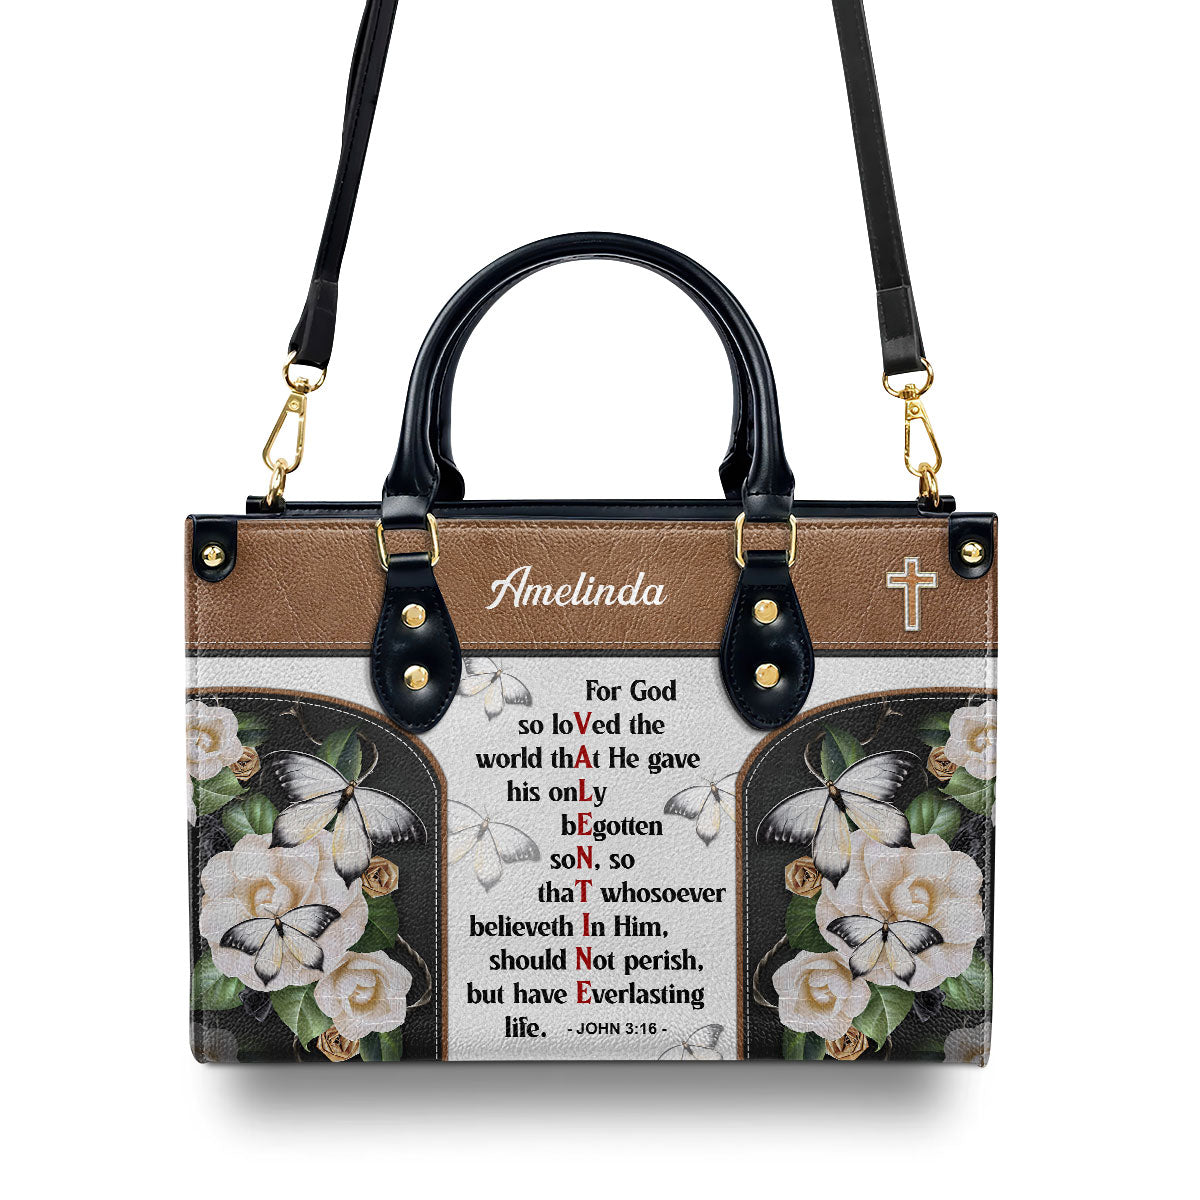 Personalized Leather Handbag Christian Valentines Day Ideas John 316 For God So Loved The World Bible Verse Spiritual Gifts